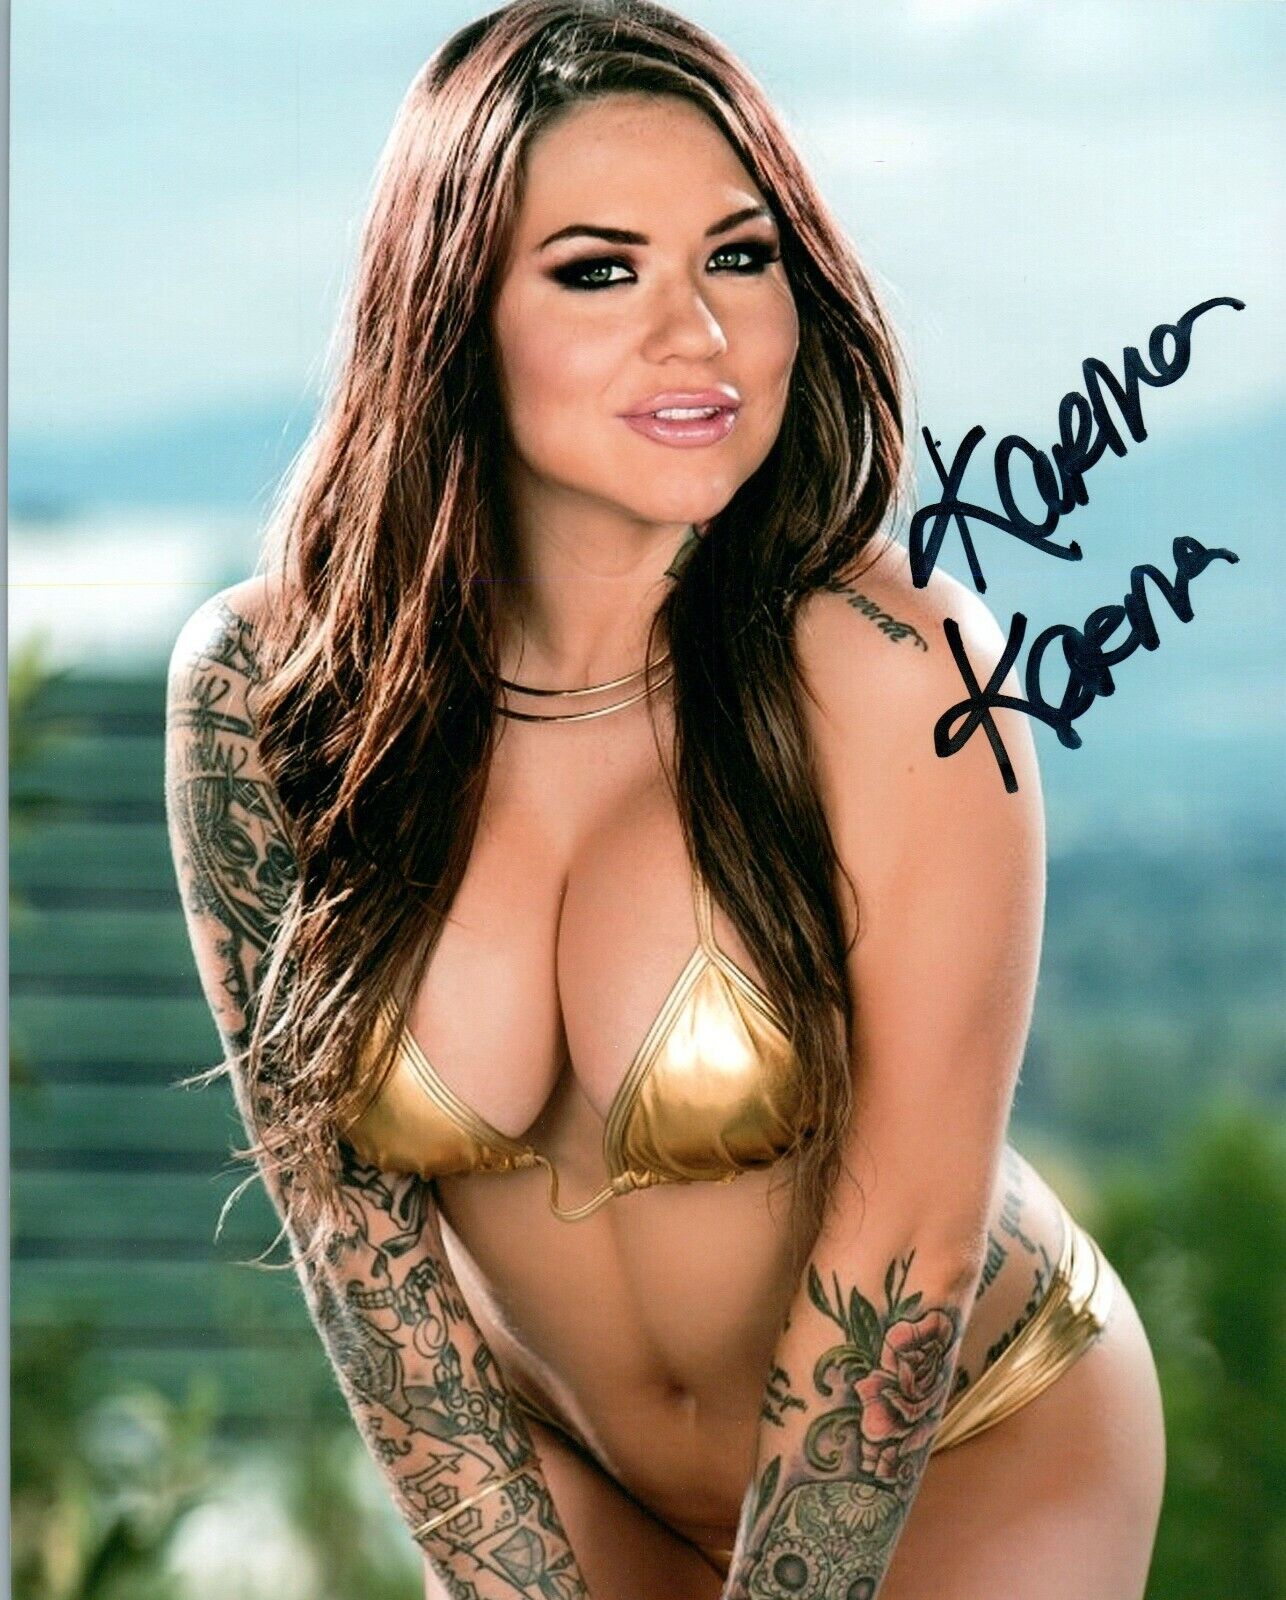 Karmen Karma Super Sexy Hot Adult Star Signed 8x10 Photo Poster painting w/COA Proof 1